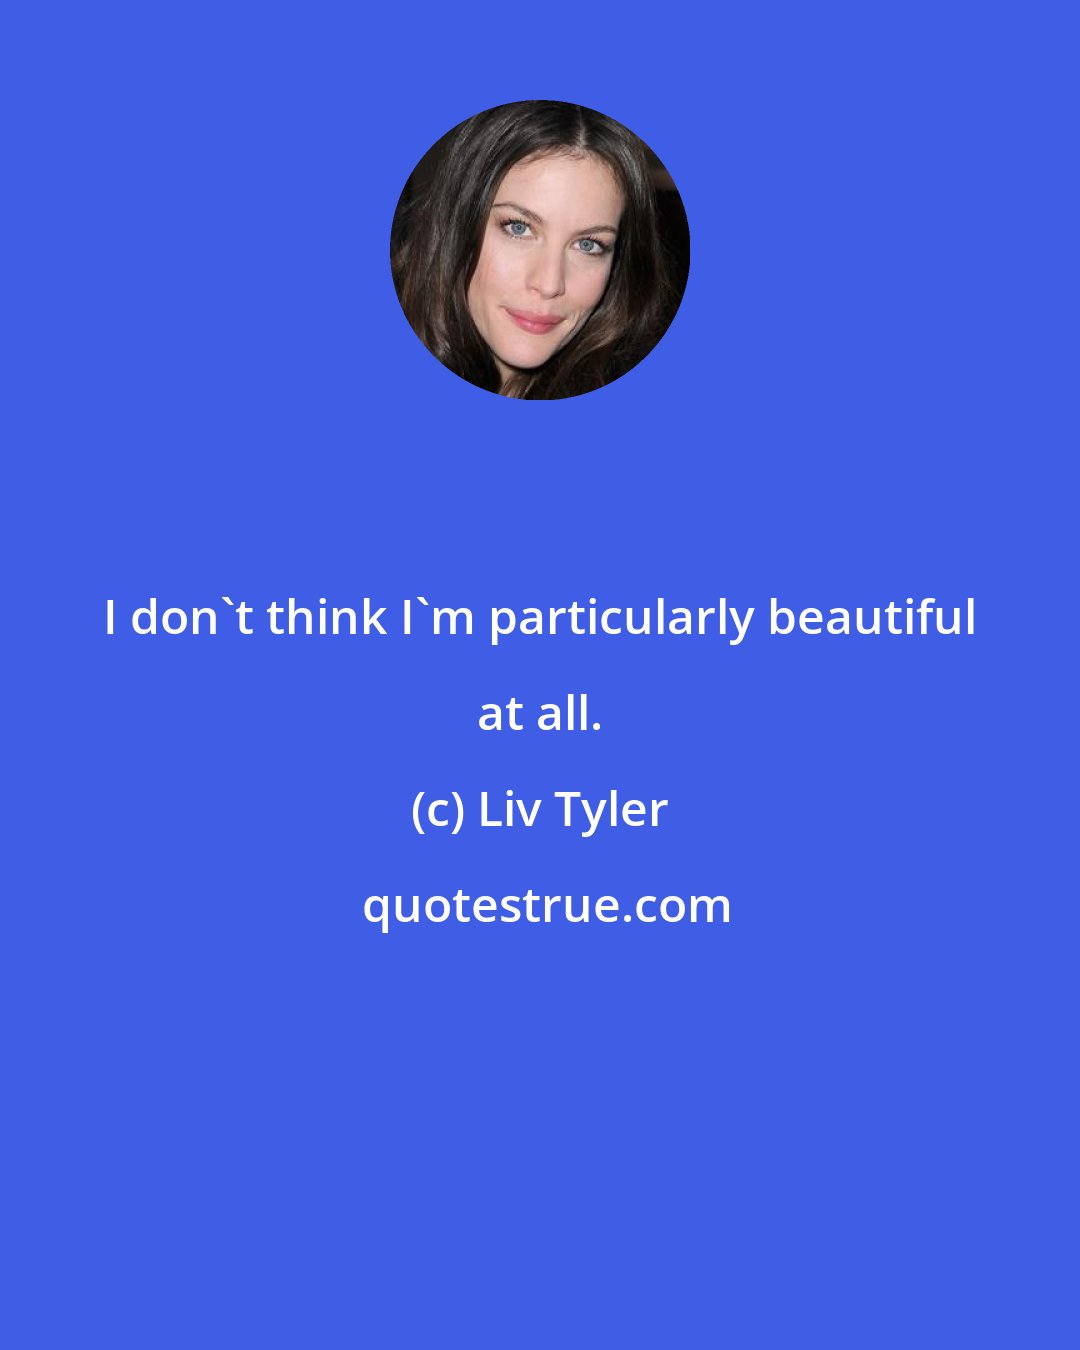 Liv Tyler: I don't think I'm particularly beautiful at all.